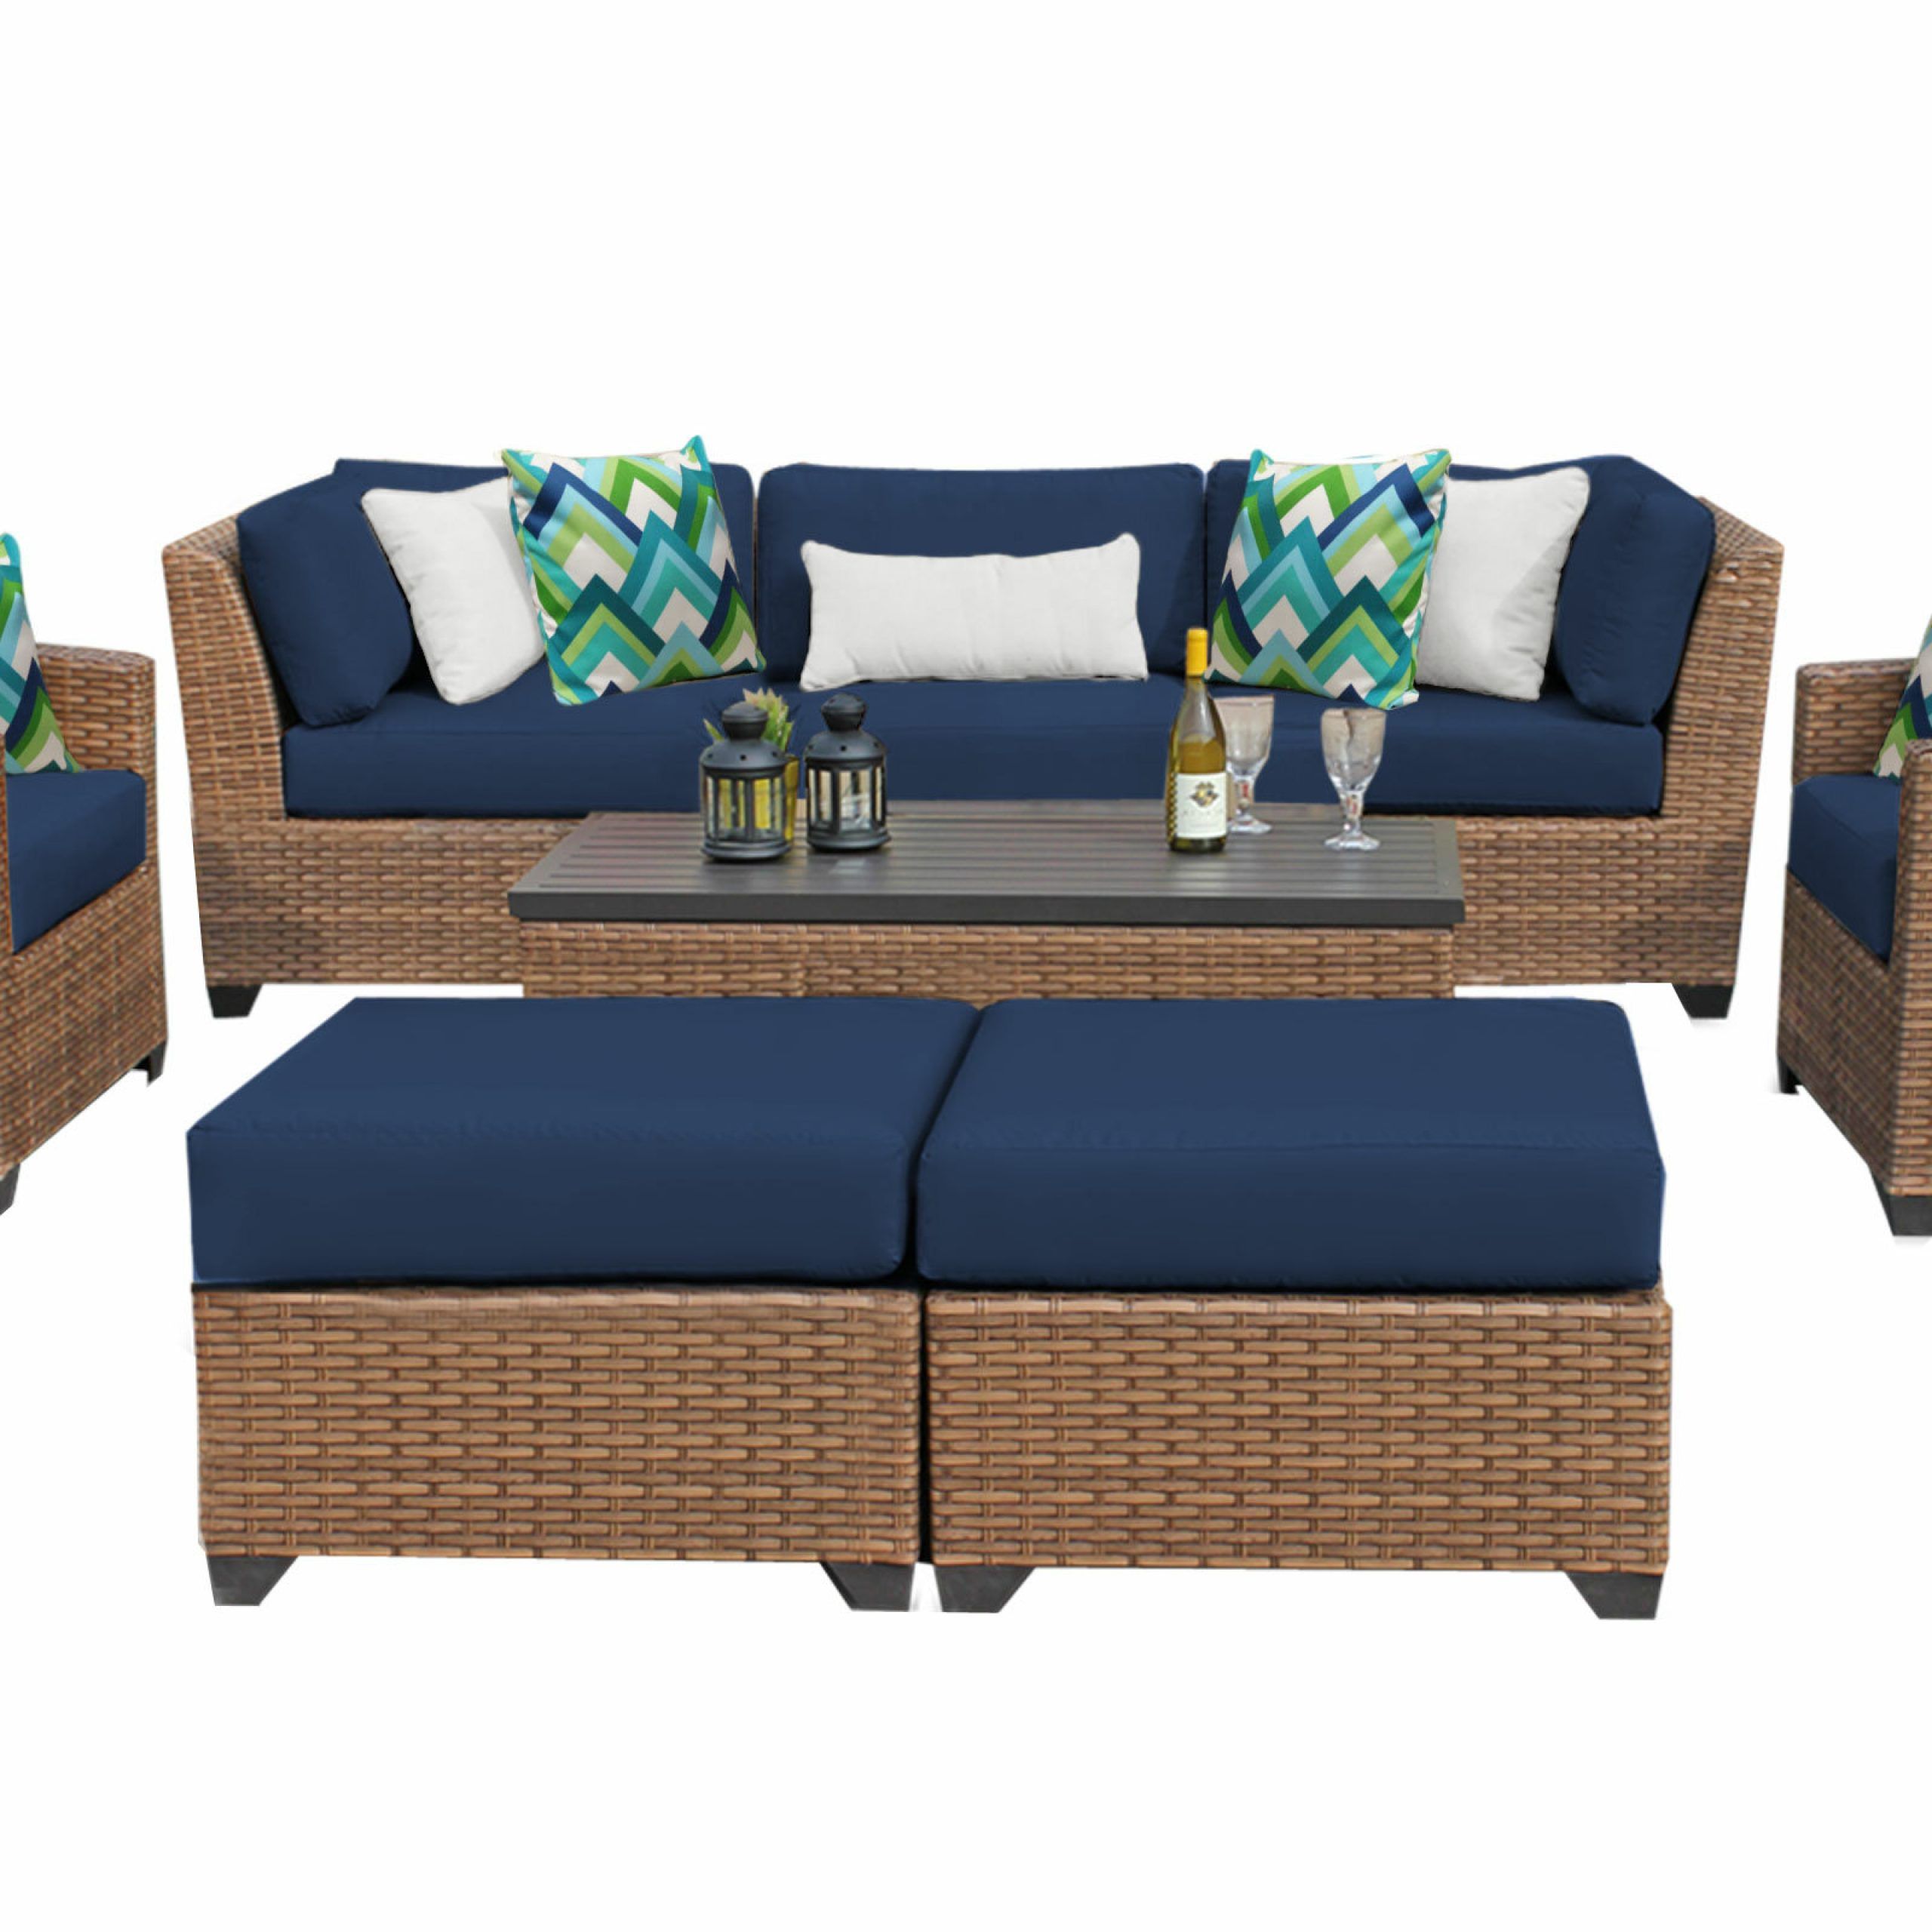 Waterbury Patio Sectionals With Cushions Within Most Popular Waterbury 8 Piece Rattan Sofa Seating Group With Cushions (View 13 of 25)